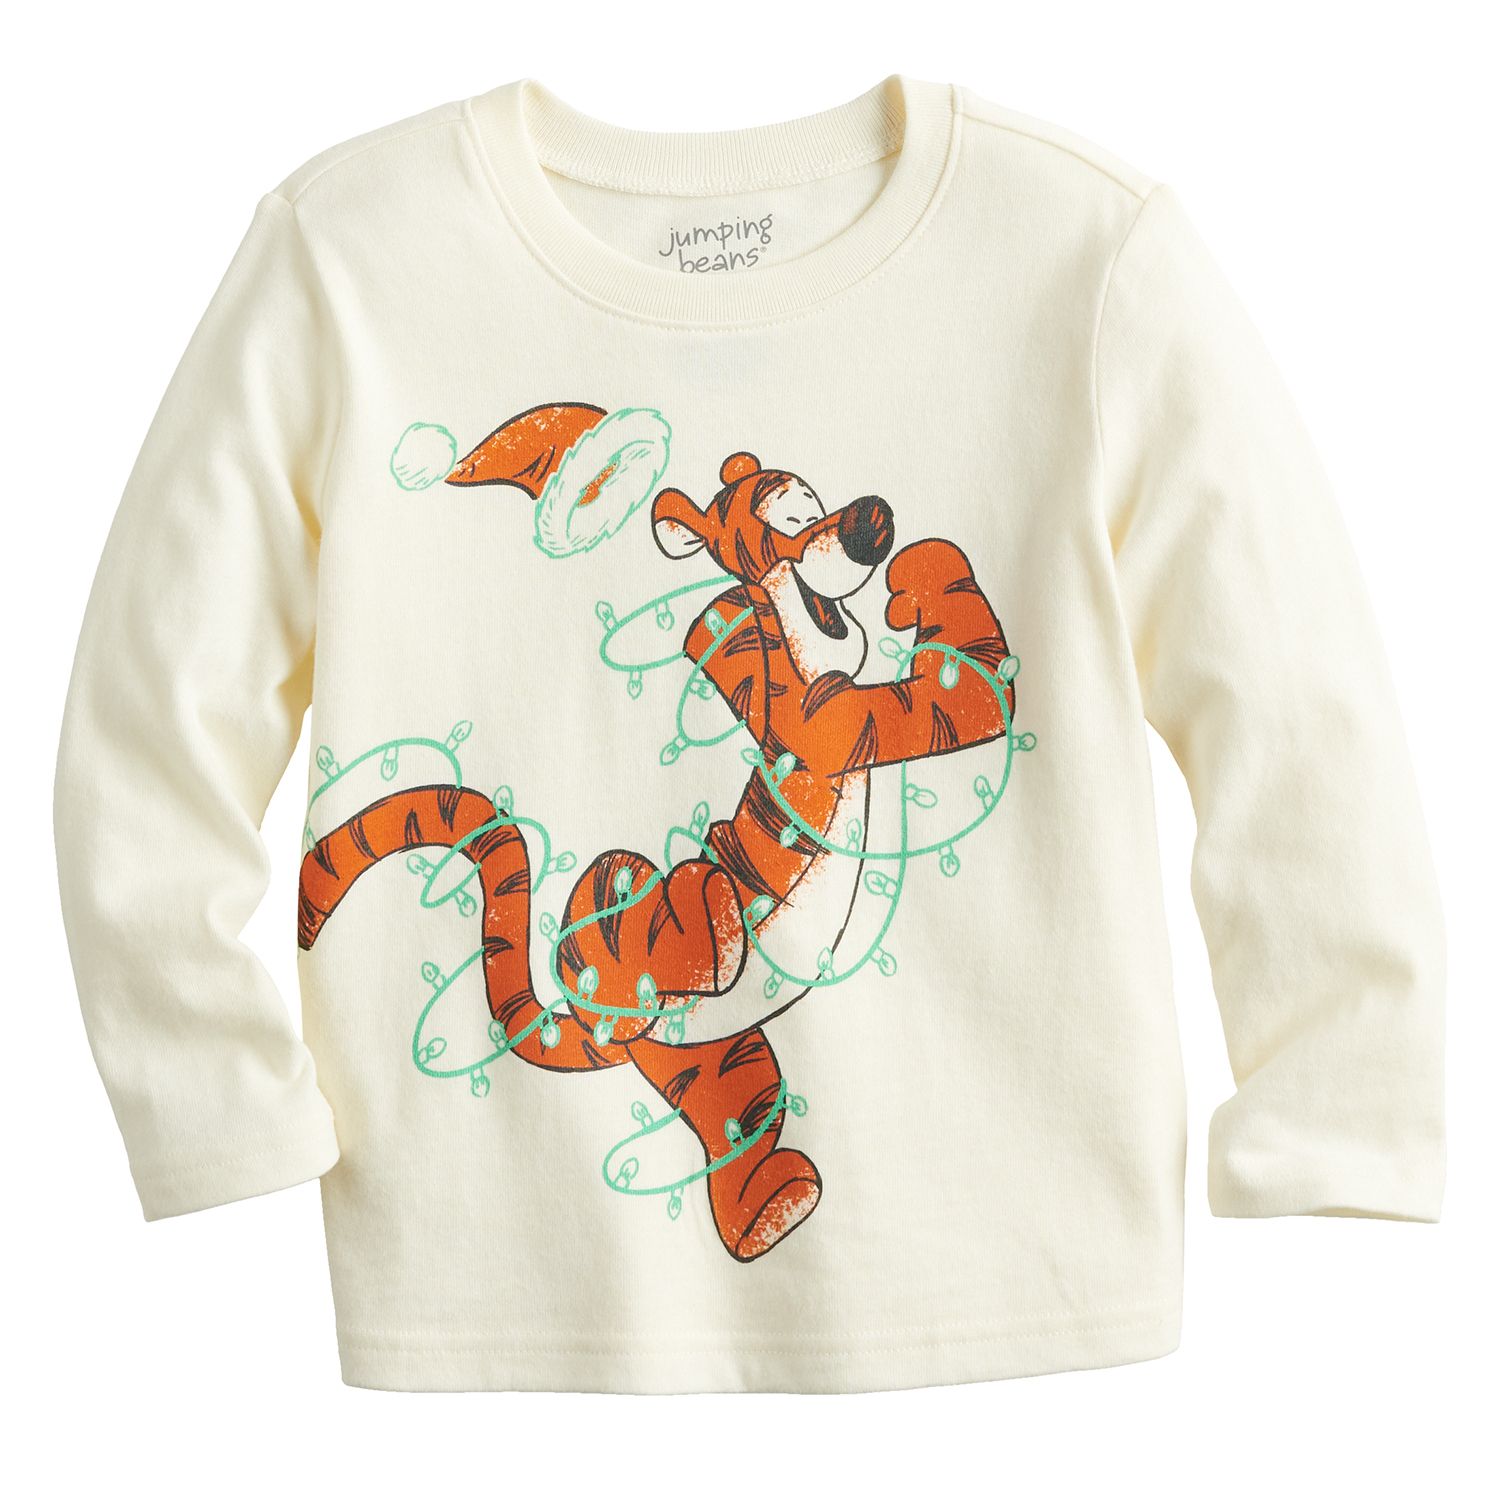 Image for Disney/Jumping Beans Disney's Winnie-The-Pooh Tigger Toddler Boy Christmas Graphic Tee by Jumping Beans® at Kohl's.